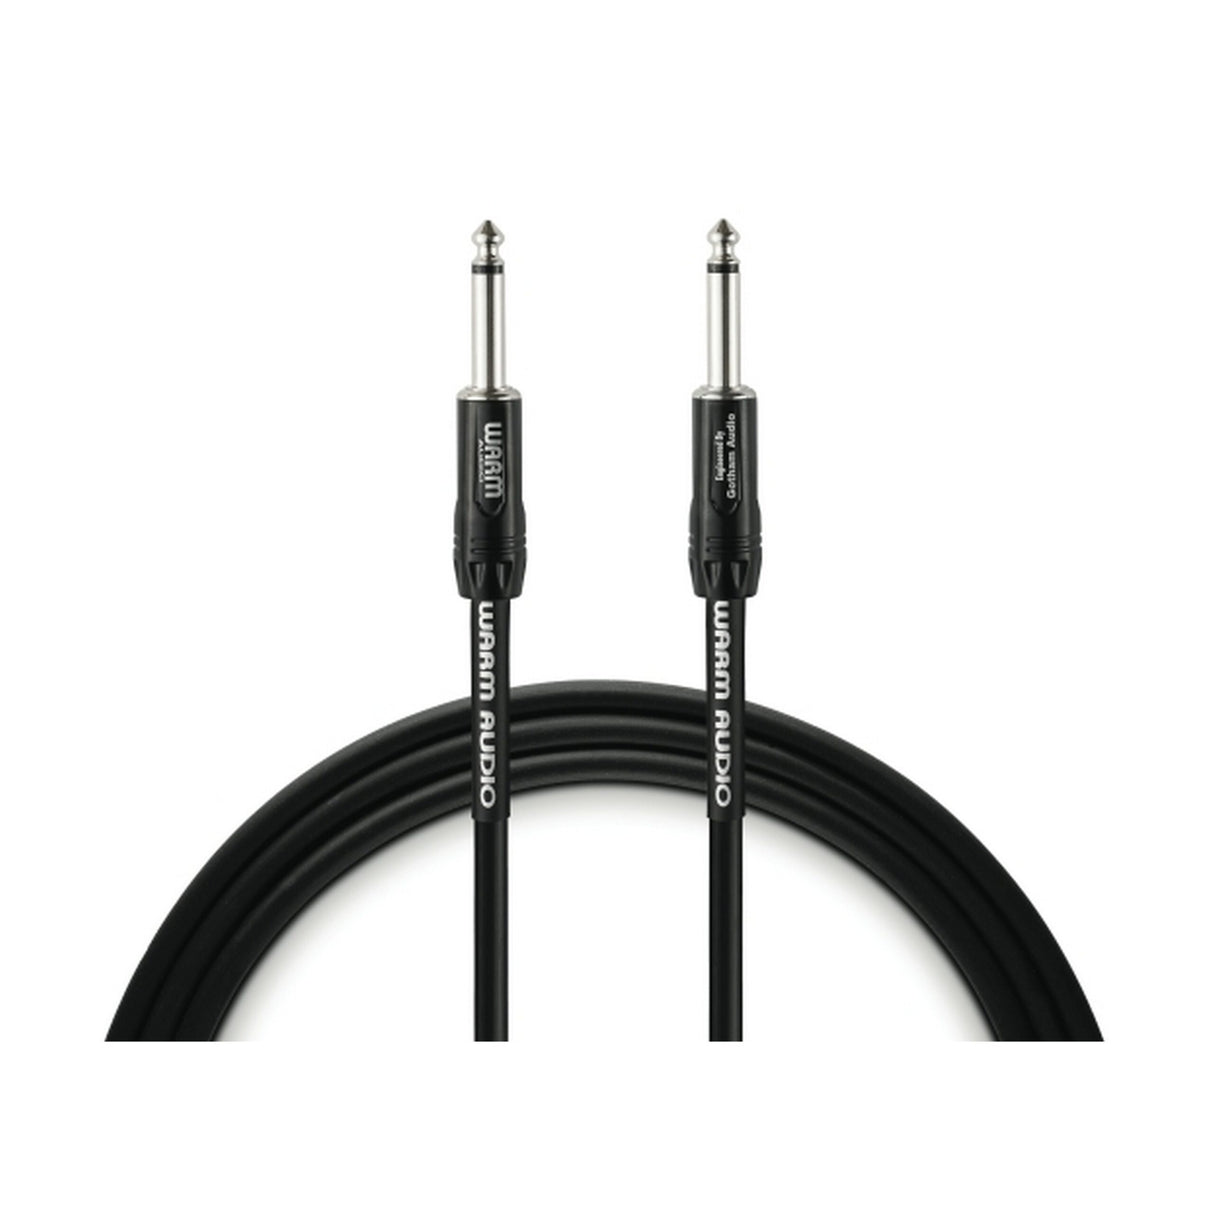 Warm Audio PRO-TS-5 Pro Series Instrument Cable, 5 Foot